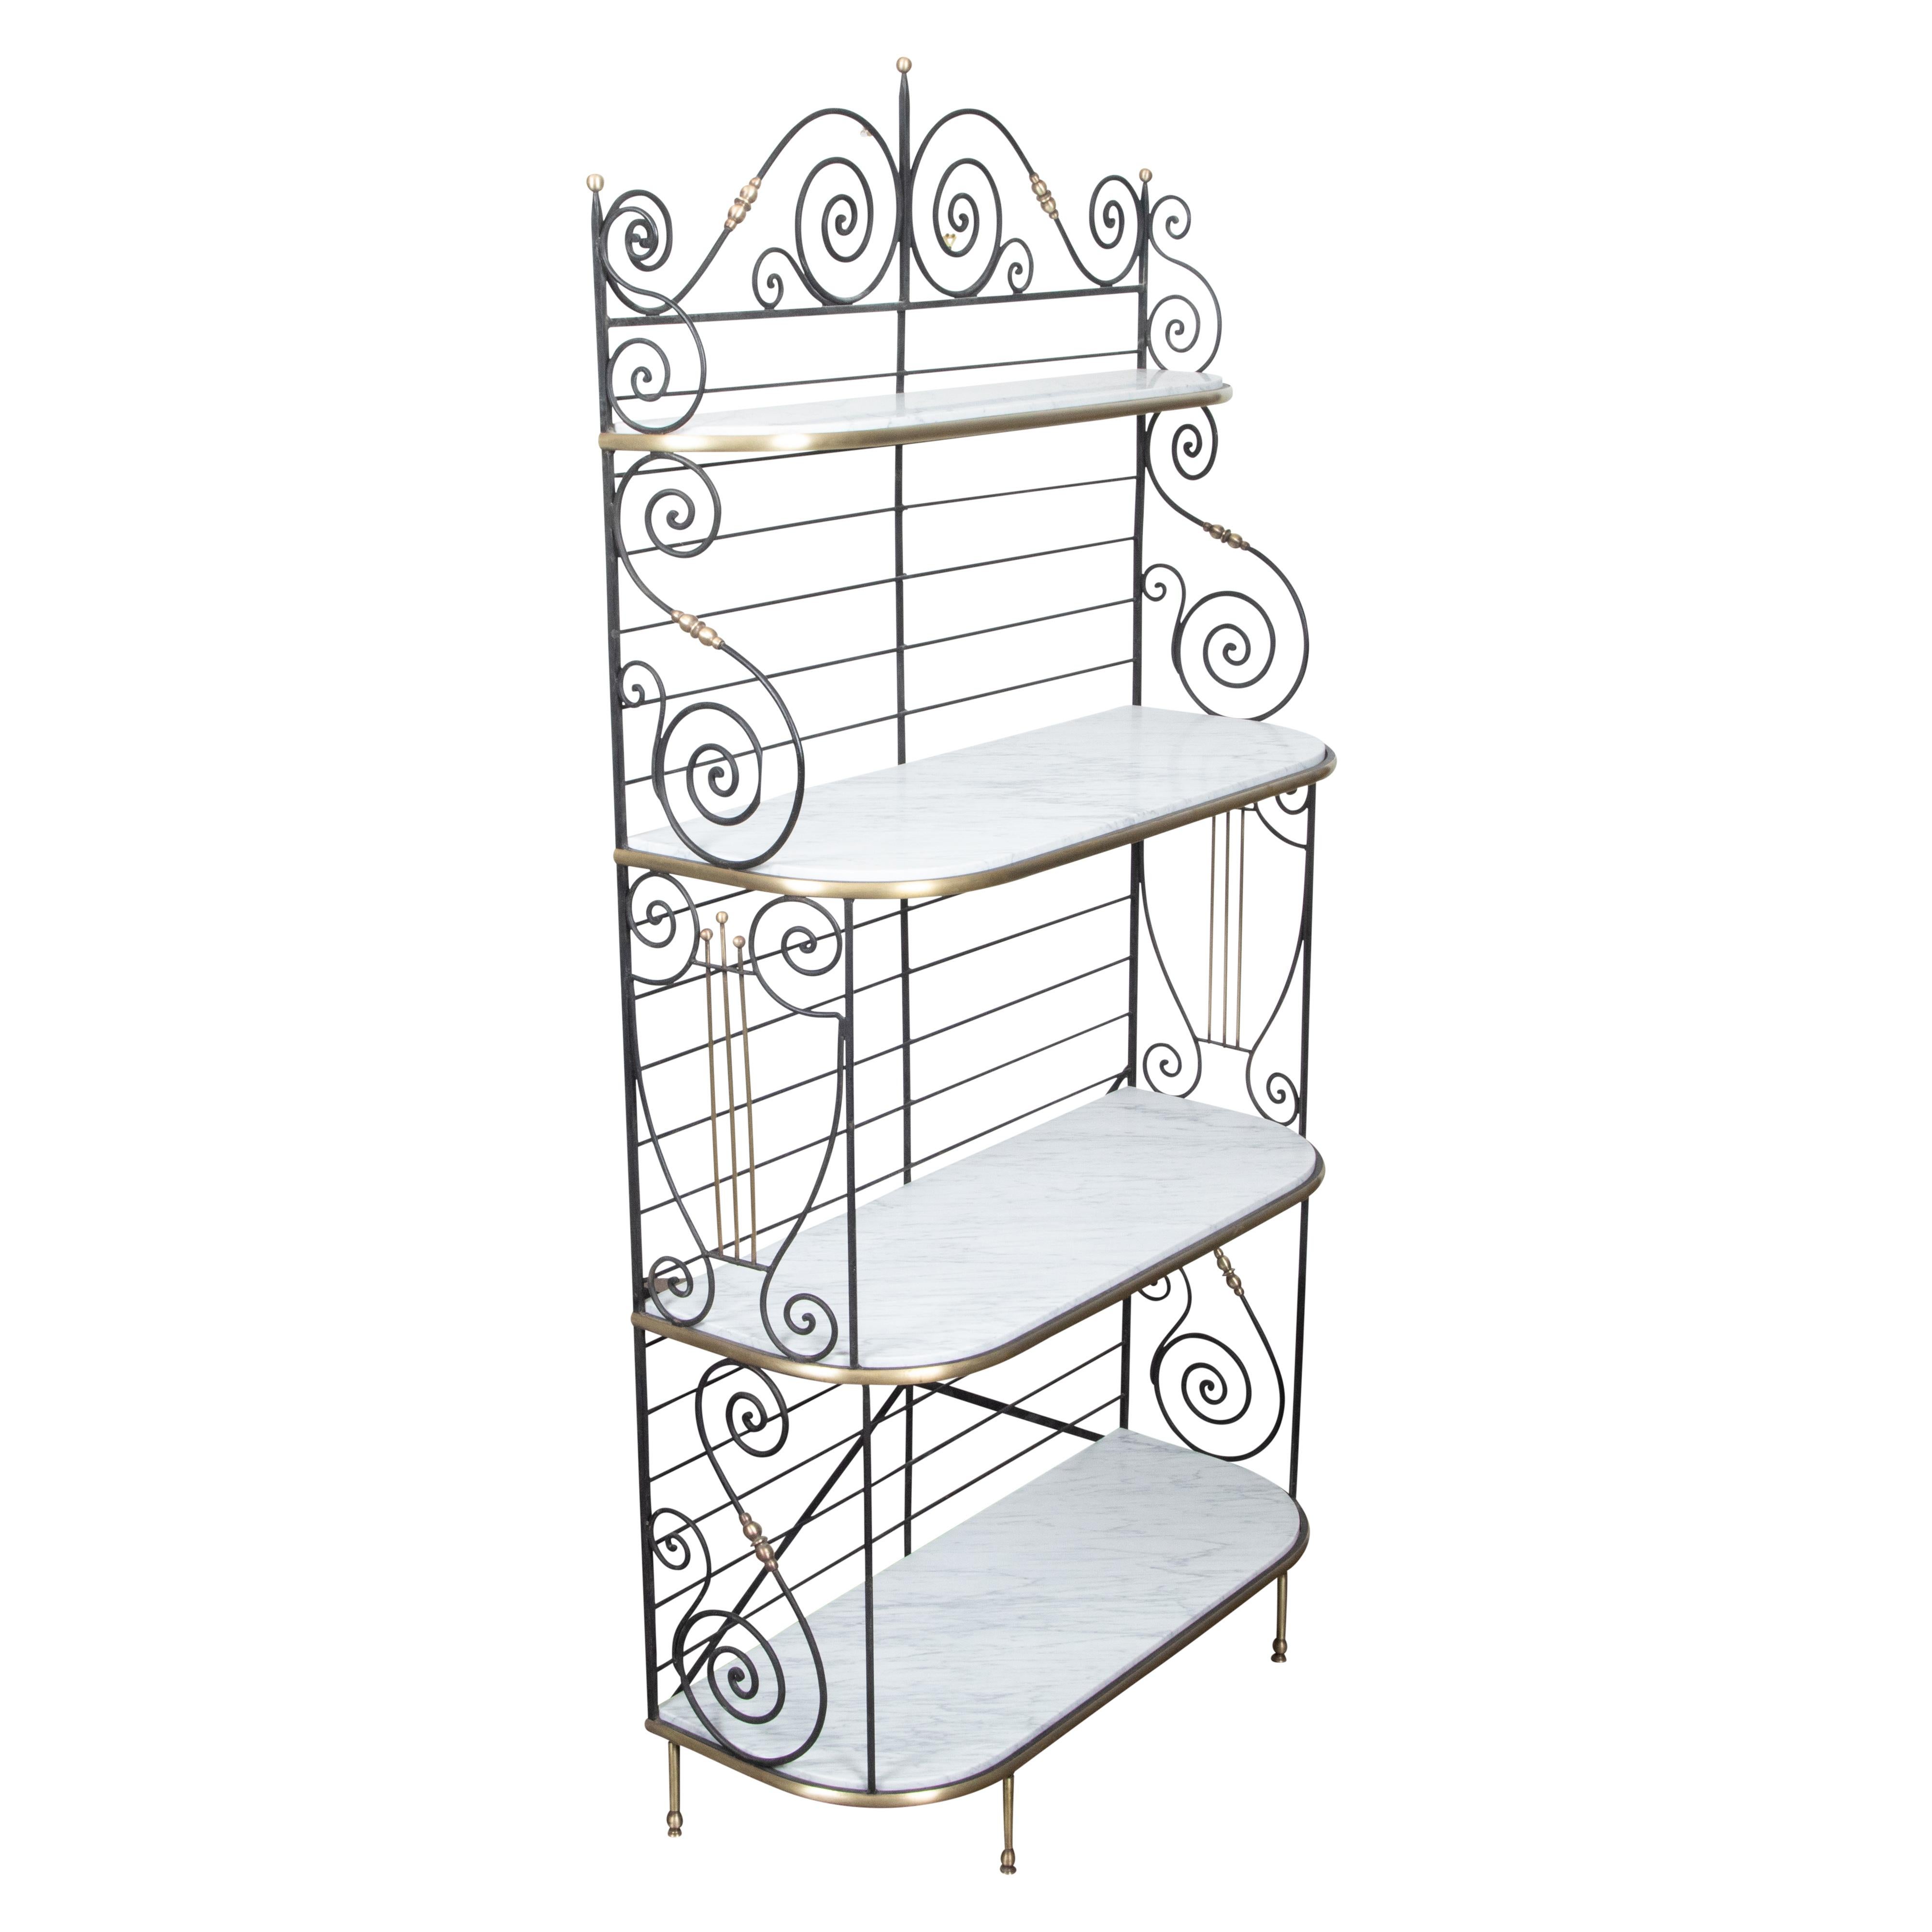 A French vintage iron ‘grille à pain” baker’s rack from the Mid-20th Century, with brass accents, scrolling patterns and new white marble shelves. Created in France during the Midcentury period, this iron rack, called a grille à pain in French, was